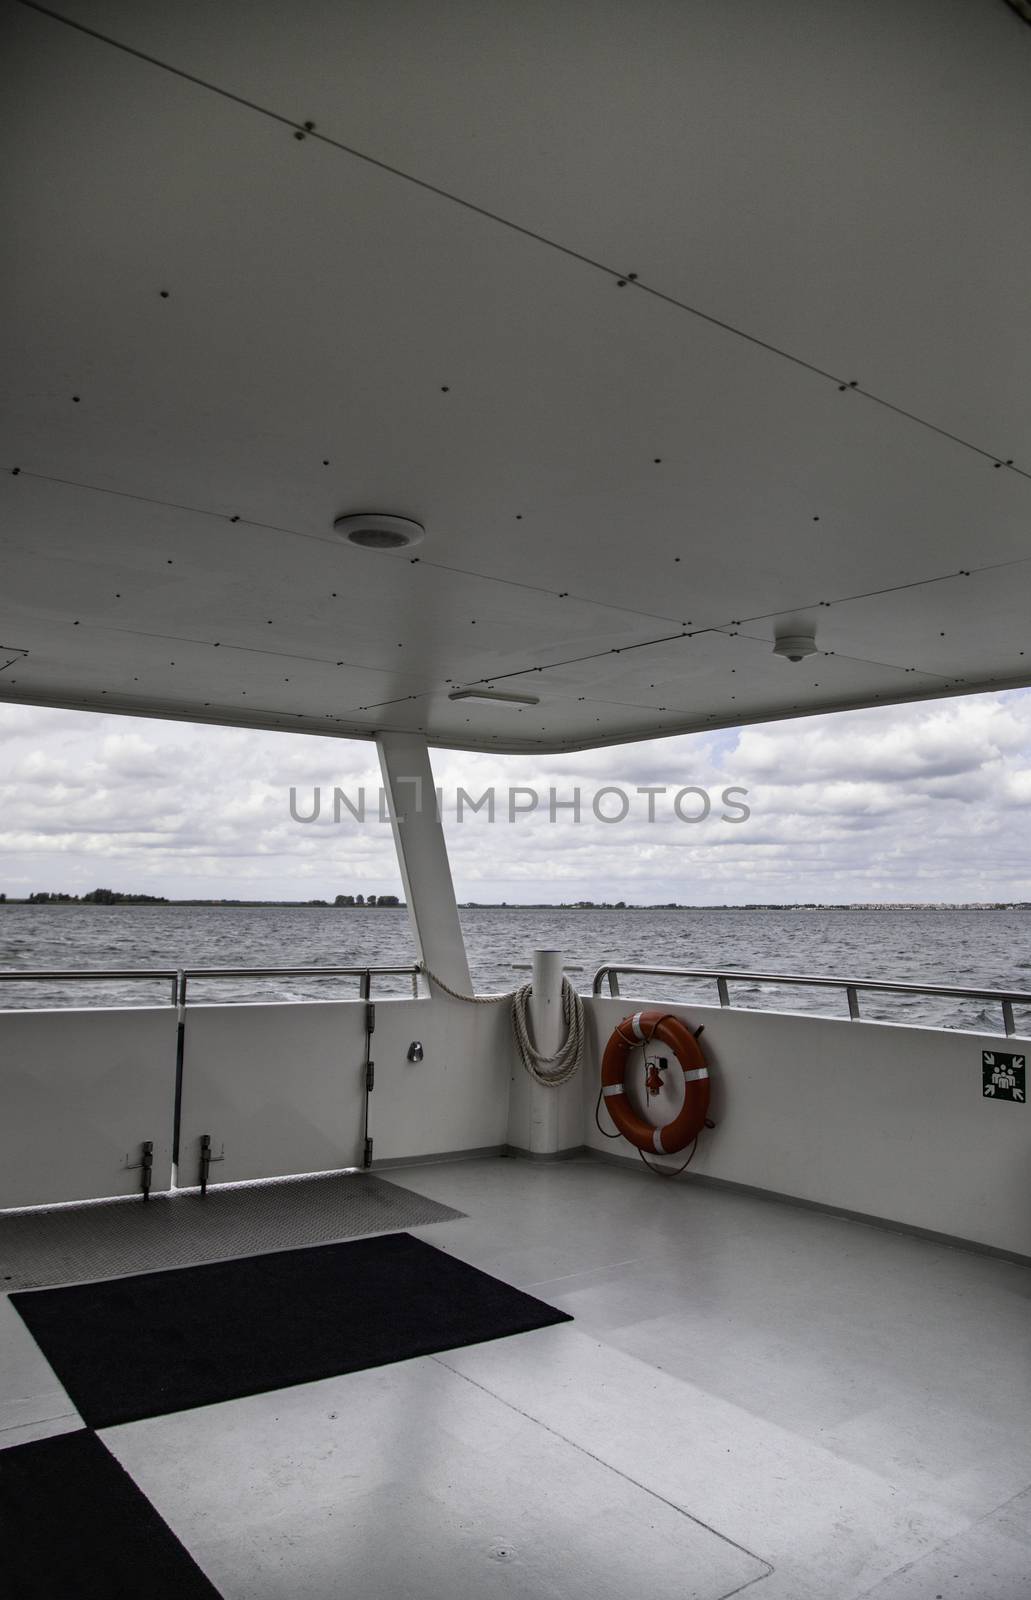 Views of the interior of a ship by esebene